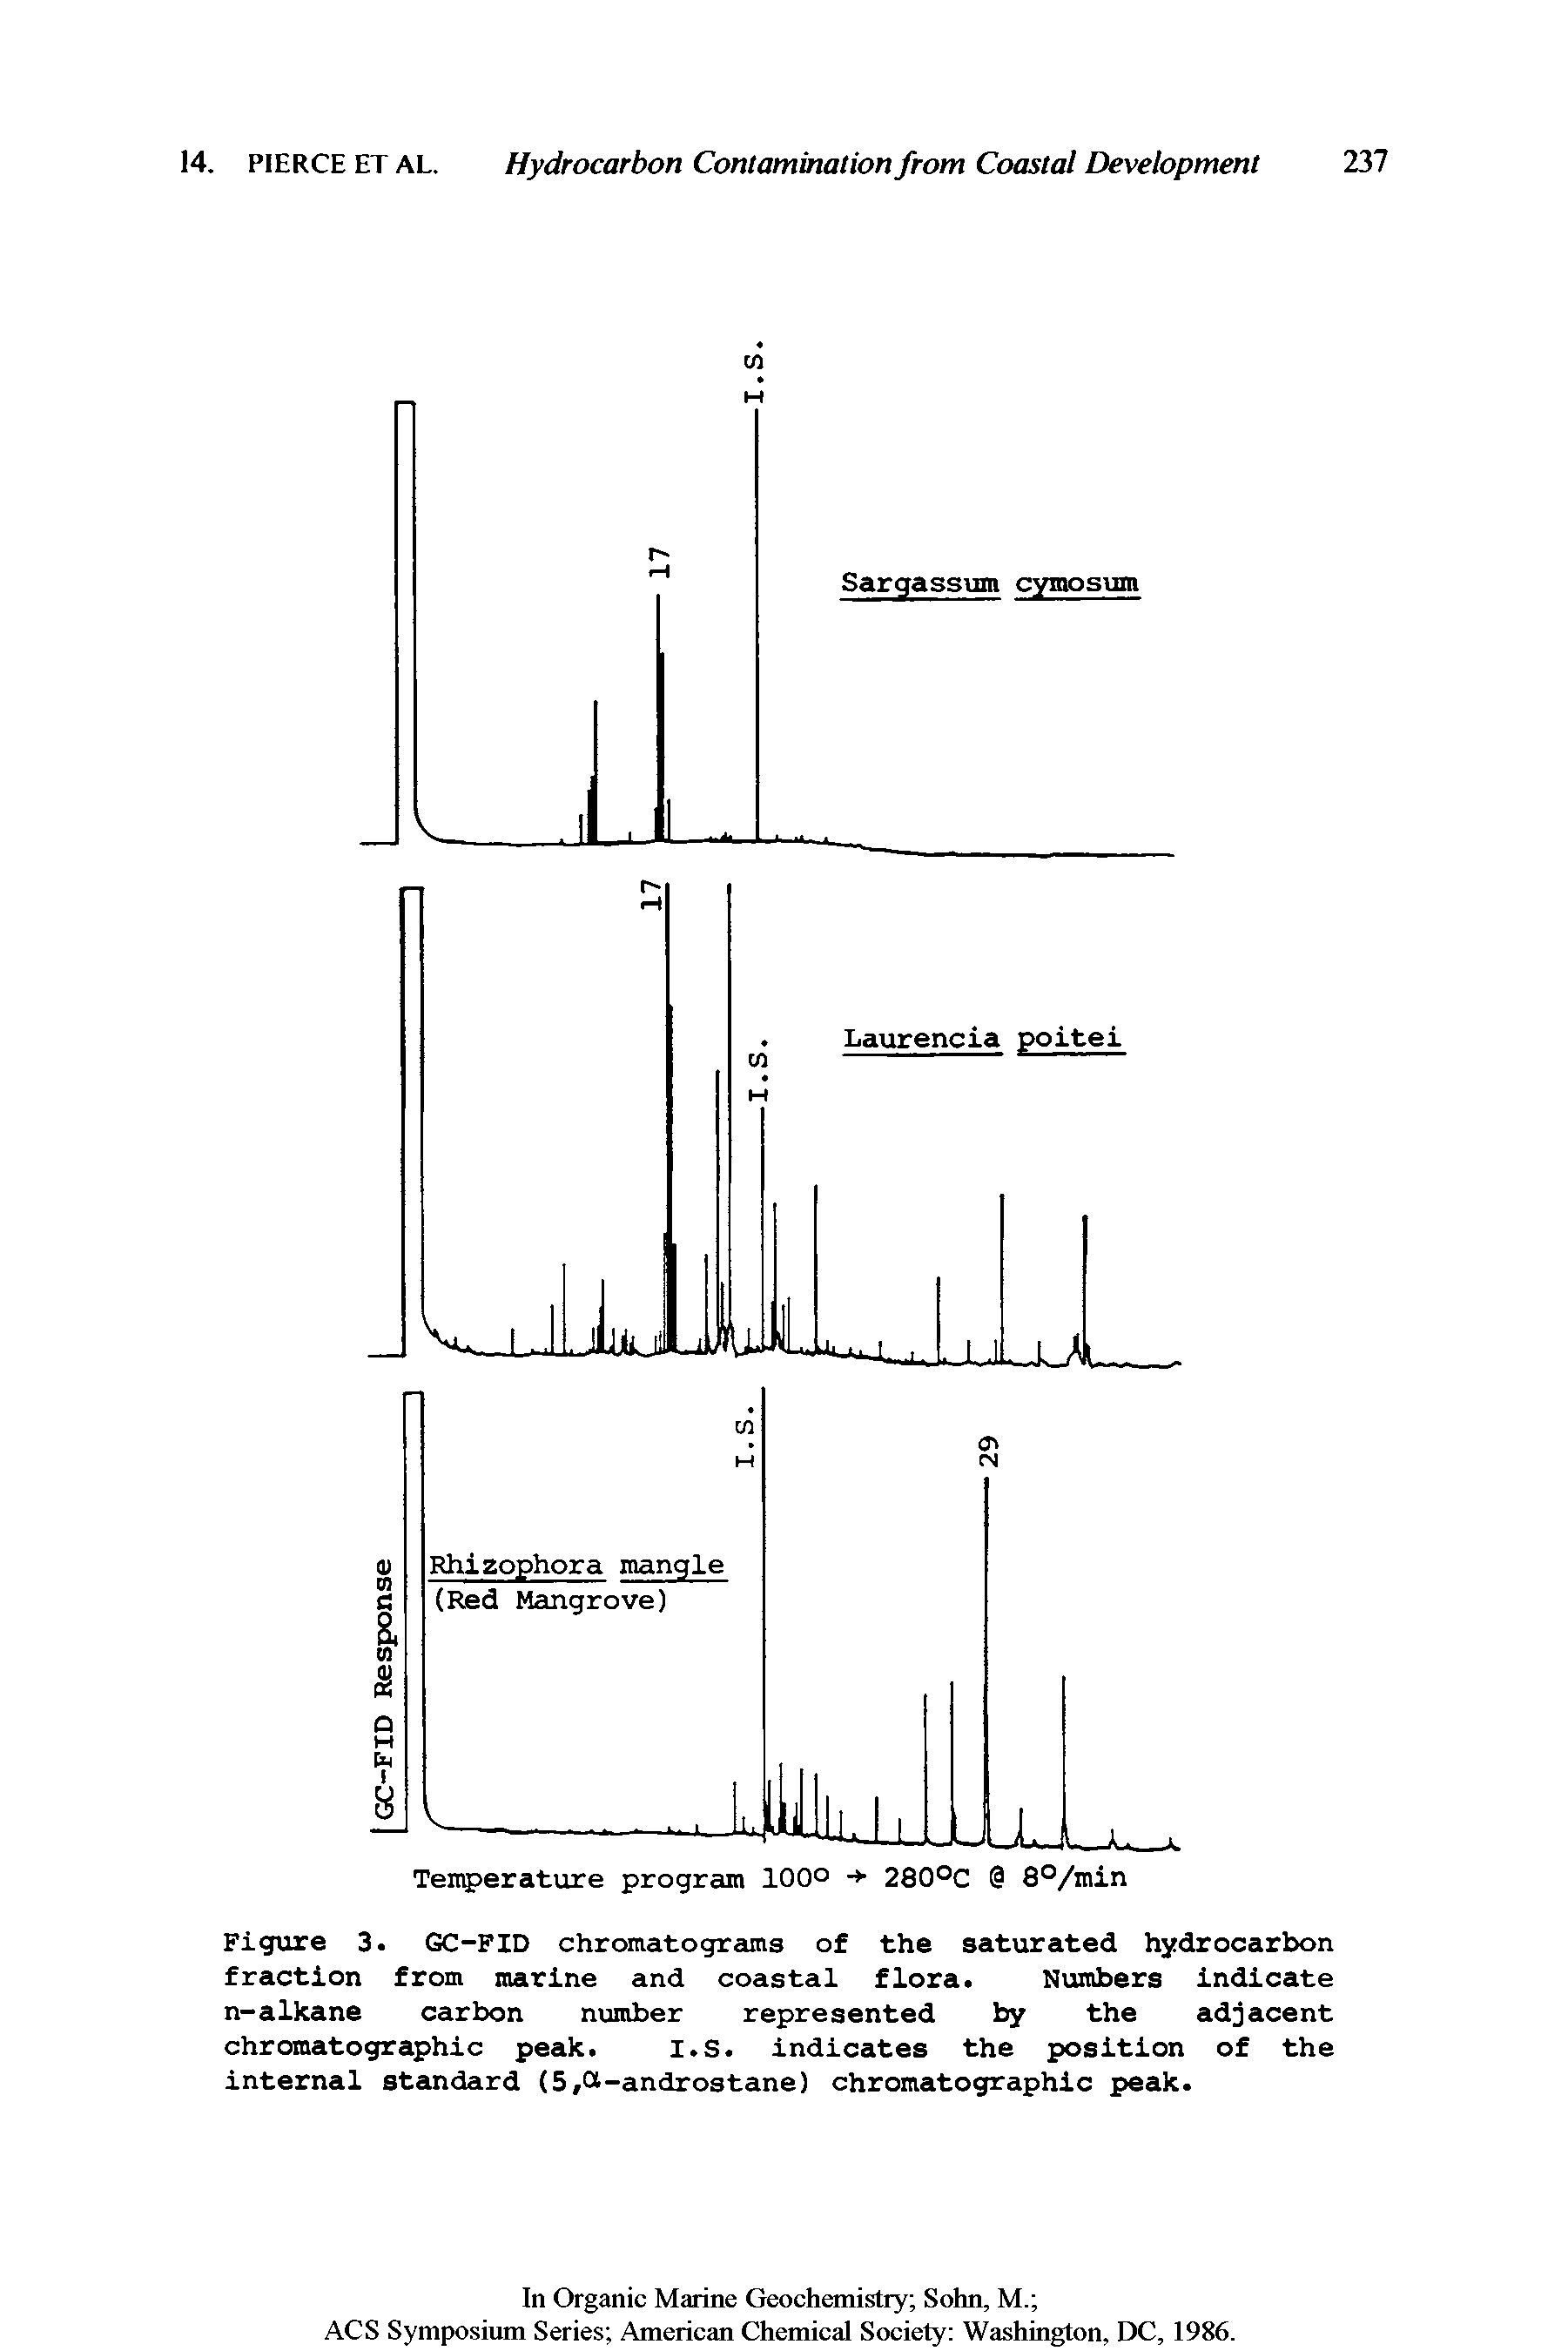 Figure 3. GC-FID chromatogreuns of the saturated hydrocarbon fraction from marine and coastal flora. Numbers indicate n-alkane carbon number represented by the adjacent chromatographic peak. I.S. indicates the position of the internal standard (5,0i-androstane) chromatographic peak.